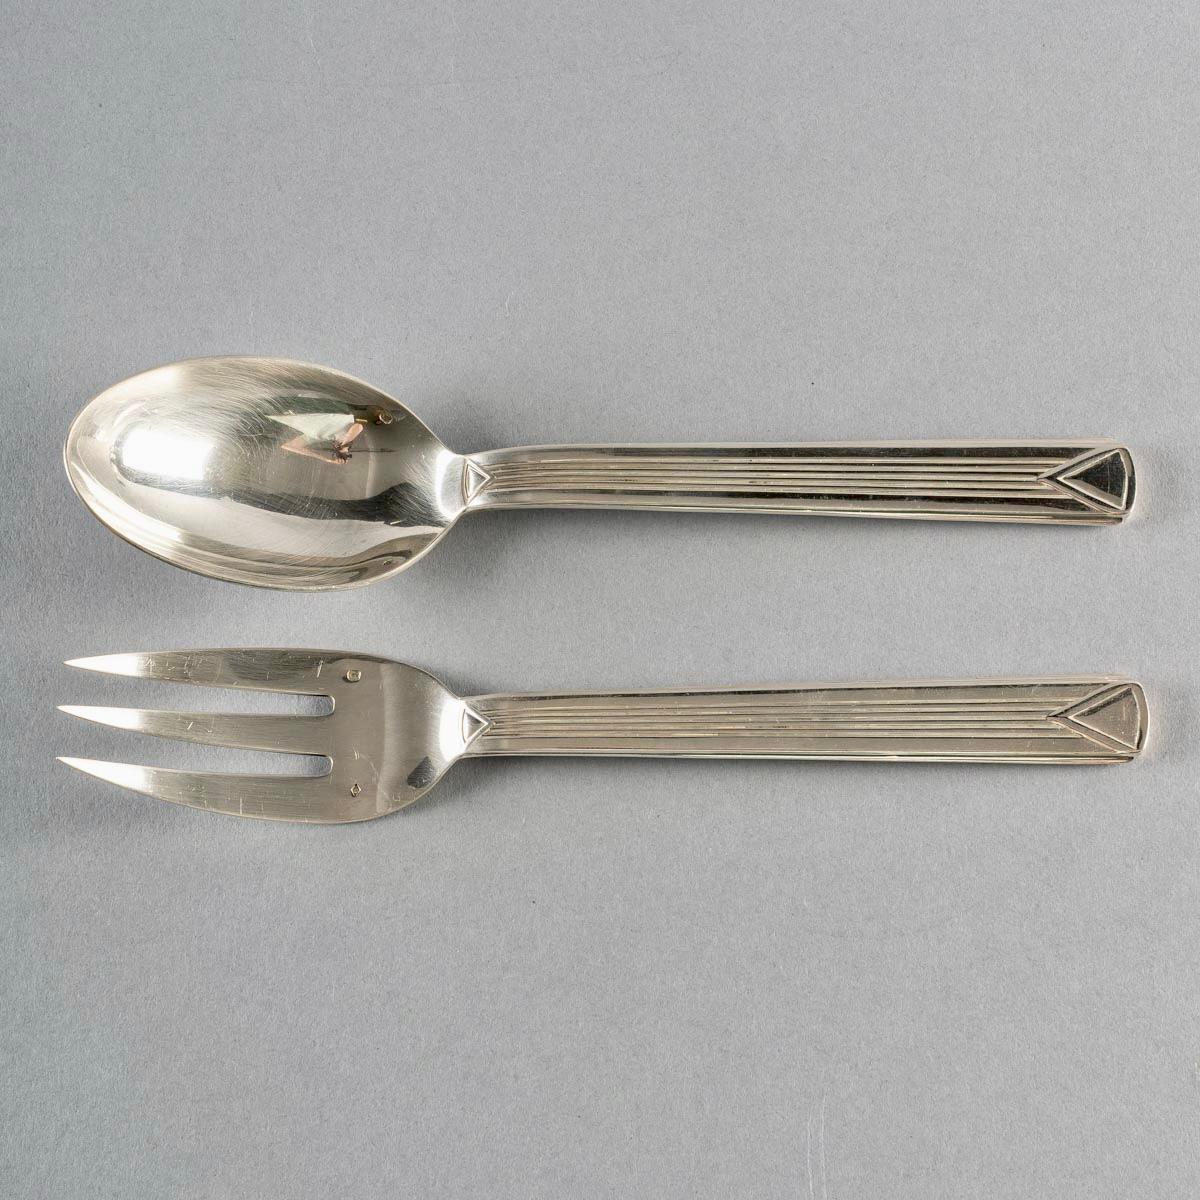 20th Century Puiforcat, Cutlery Flatware Set Aphea Solid Sterling Silver in Box, 110 Pieces